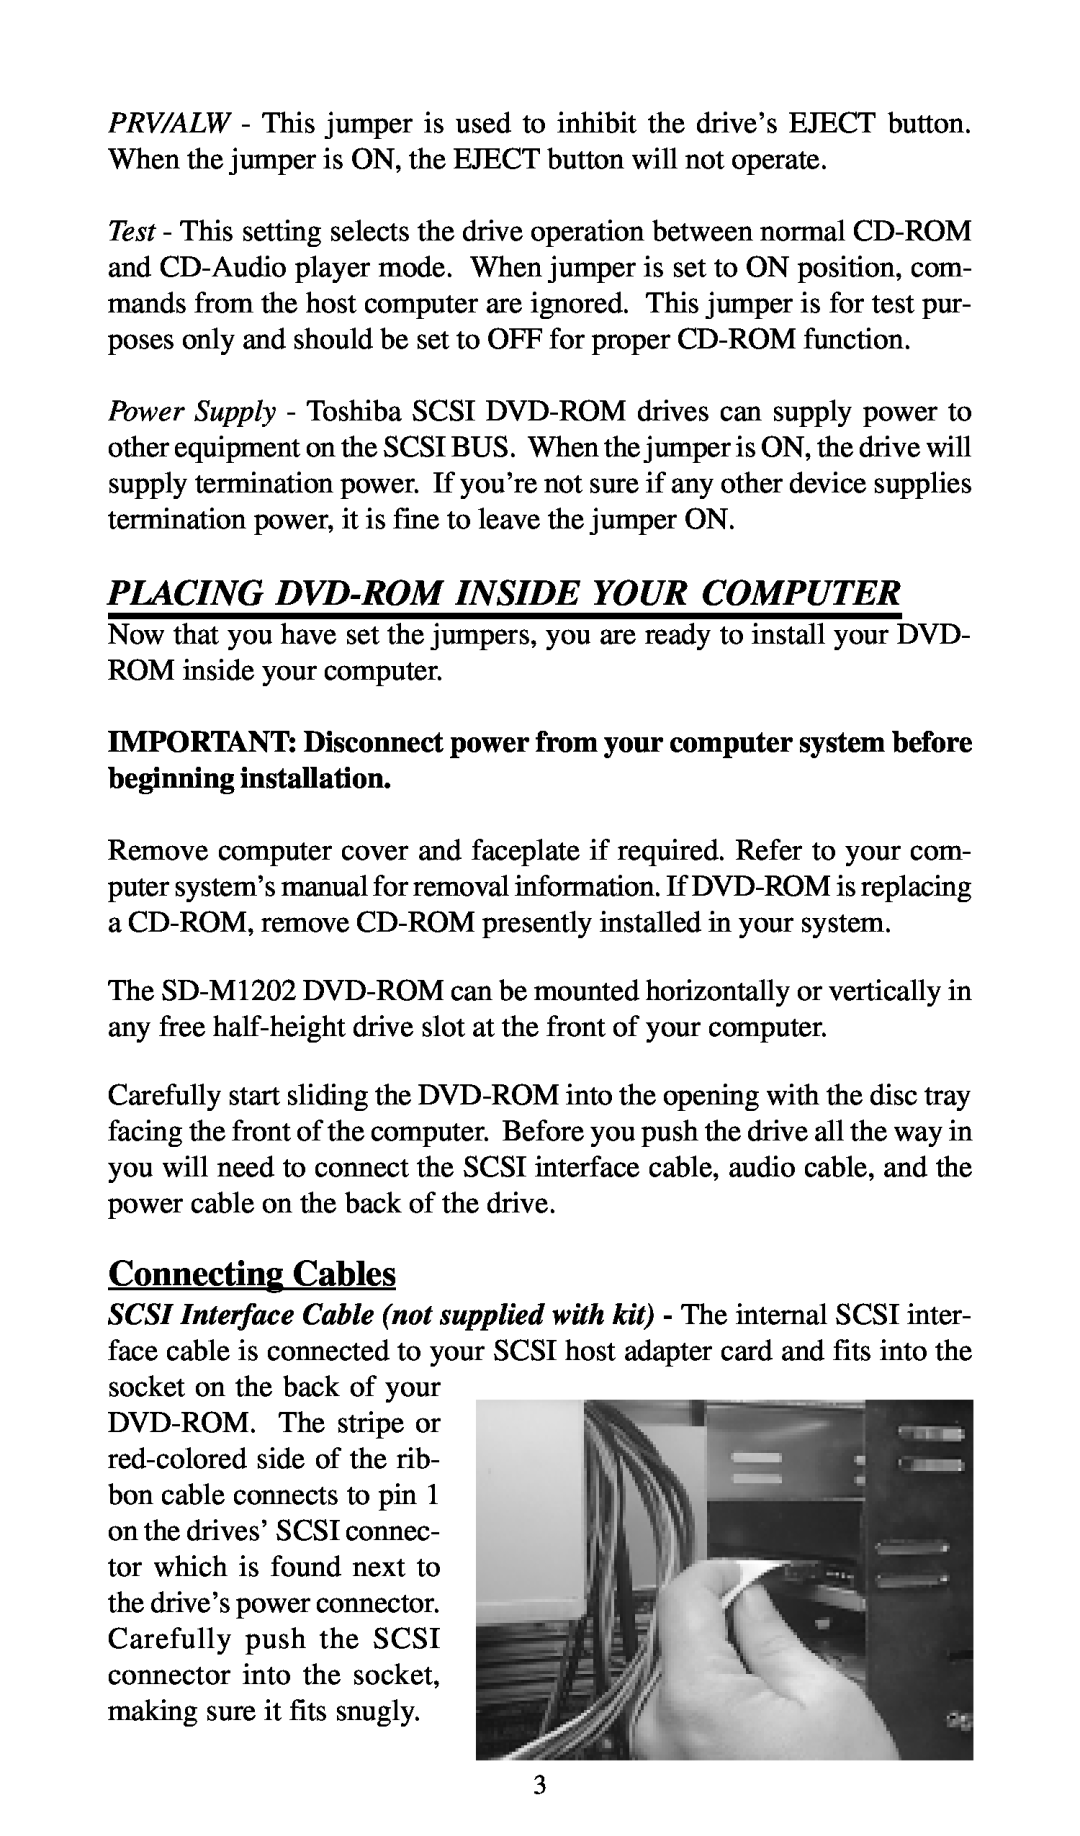 Toshiba SD-M1201 installation instructions Placing Dvd-Rom Inside Your Computer, Connecting Cables 